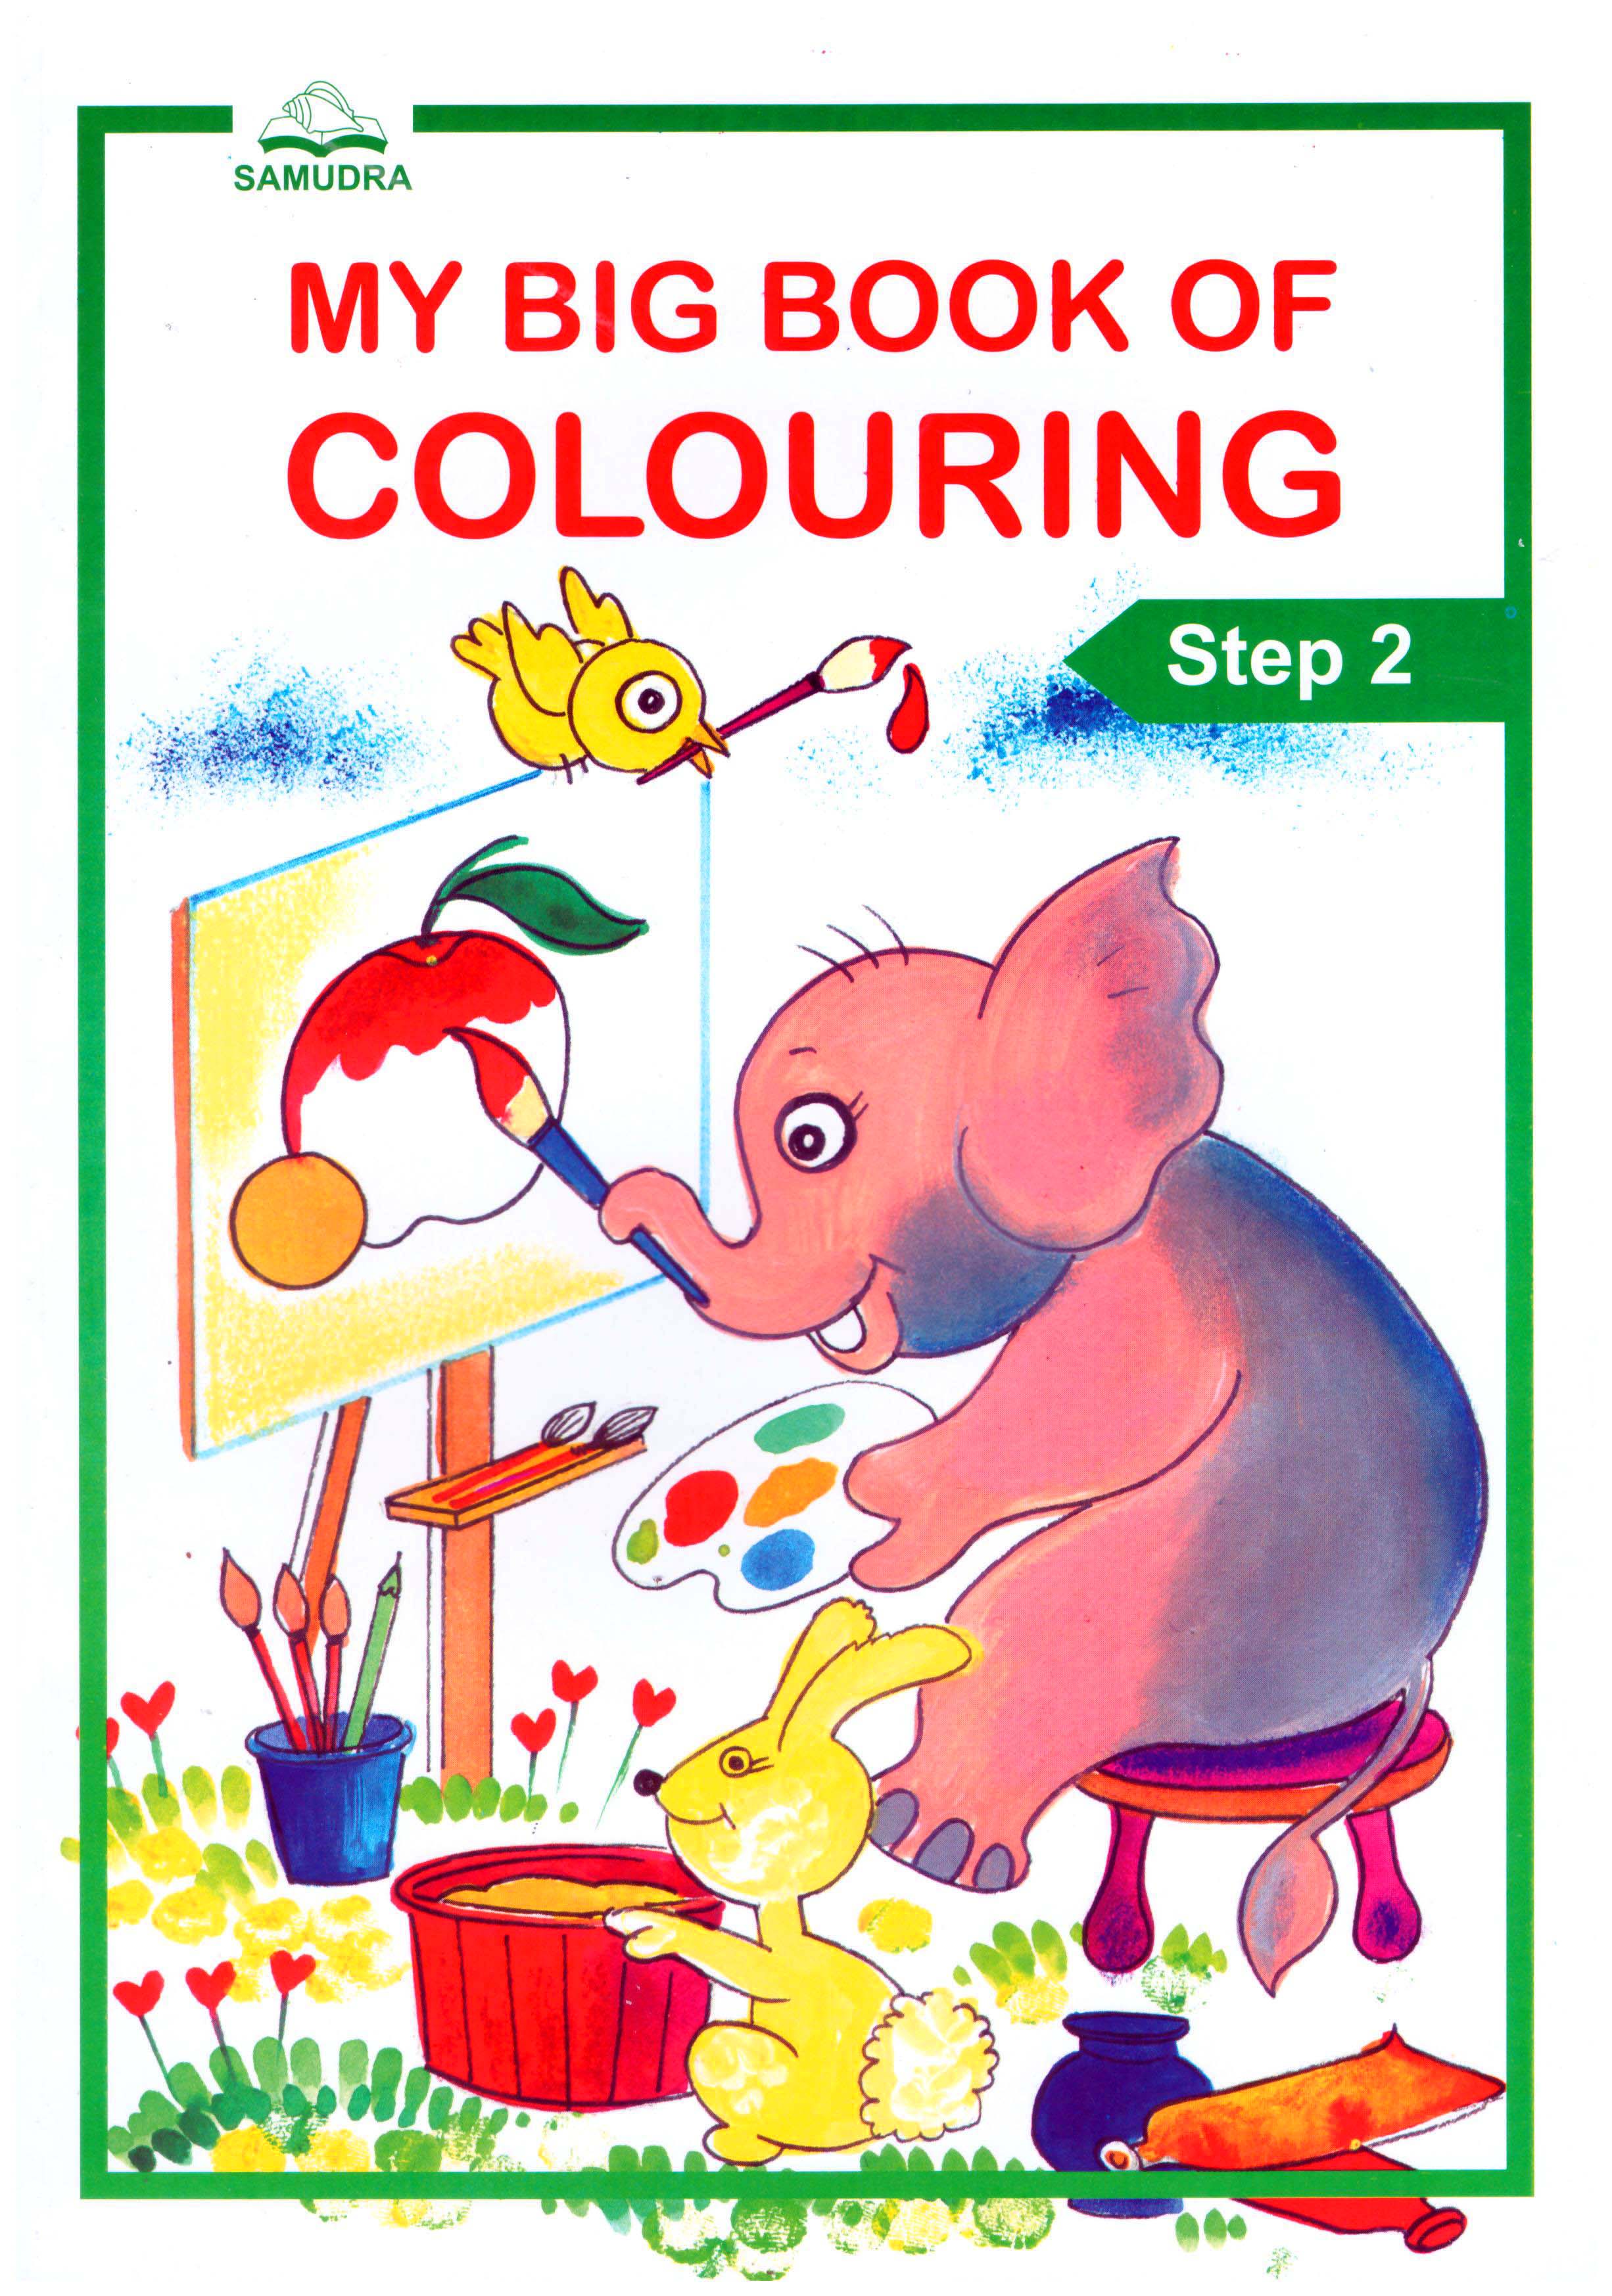 My Big Book of Colouring Step 2